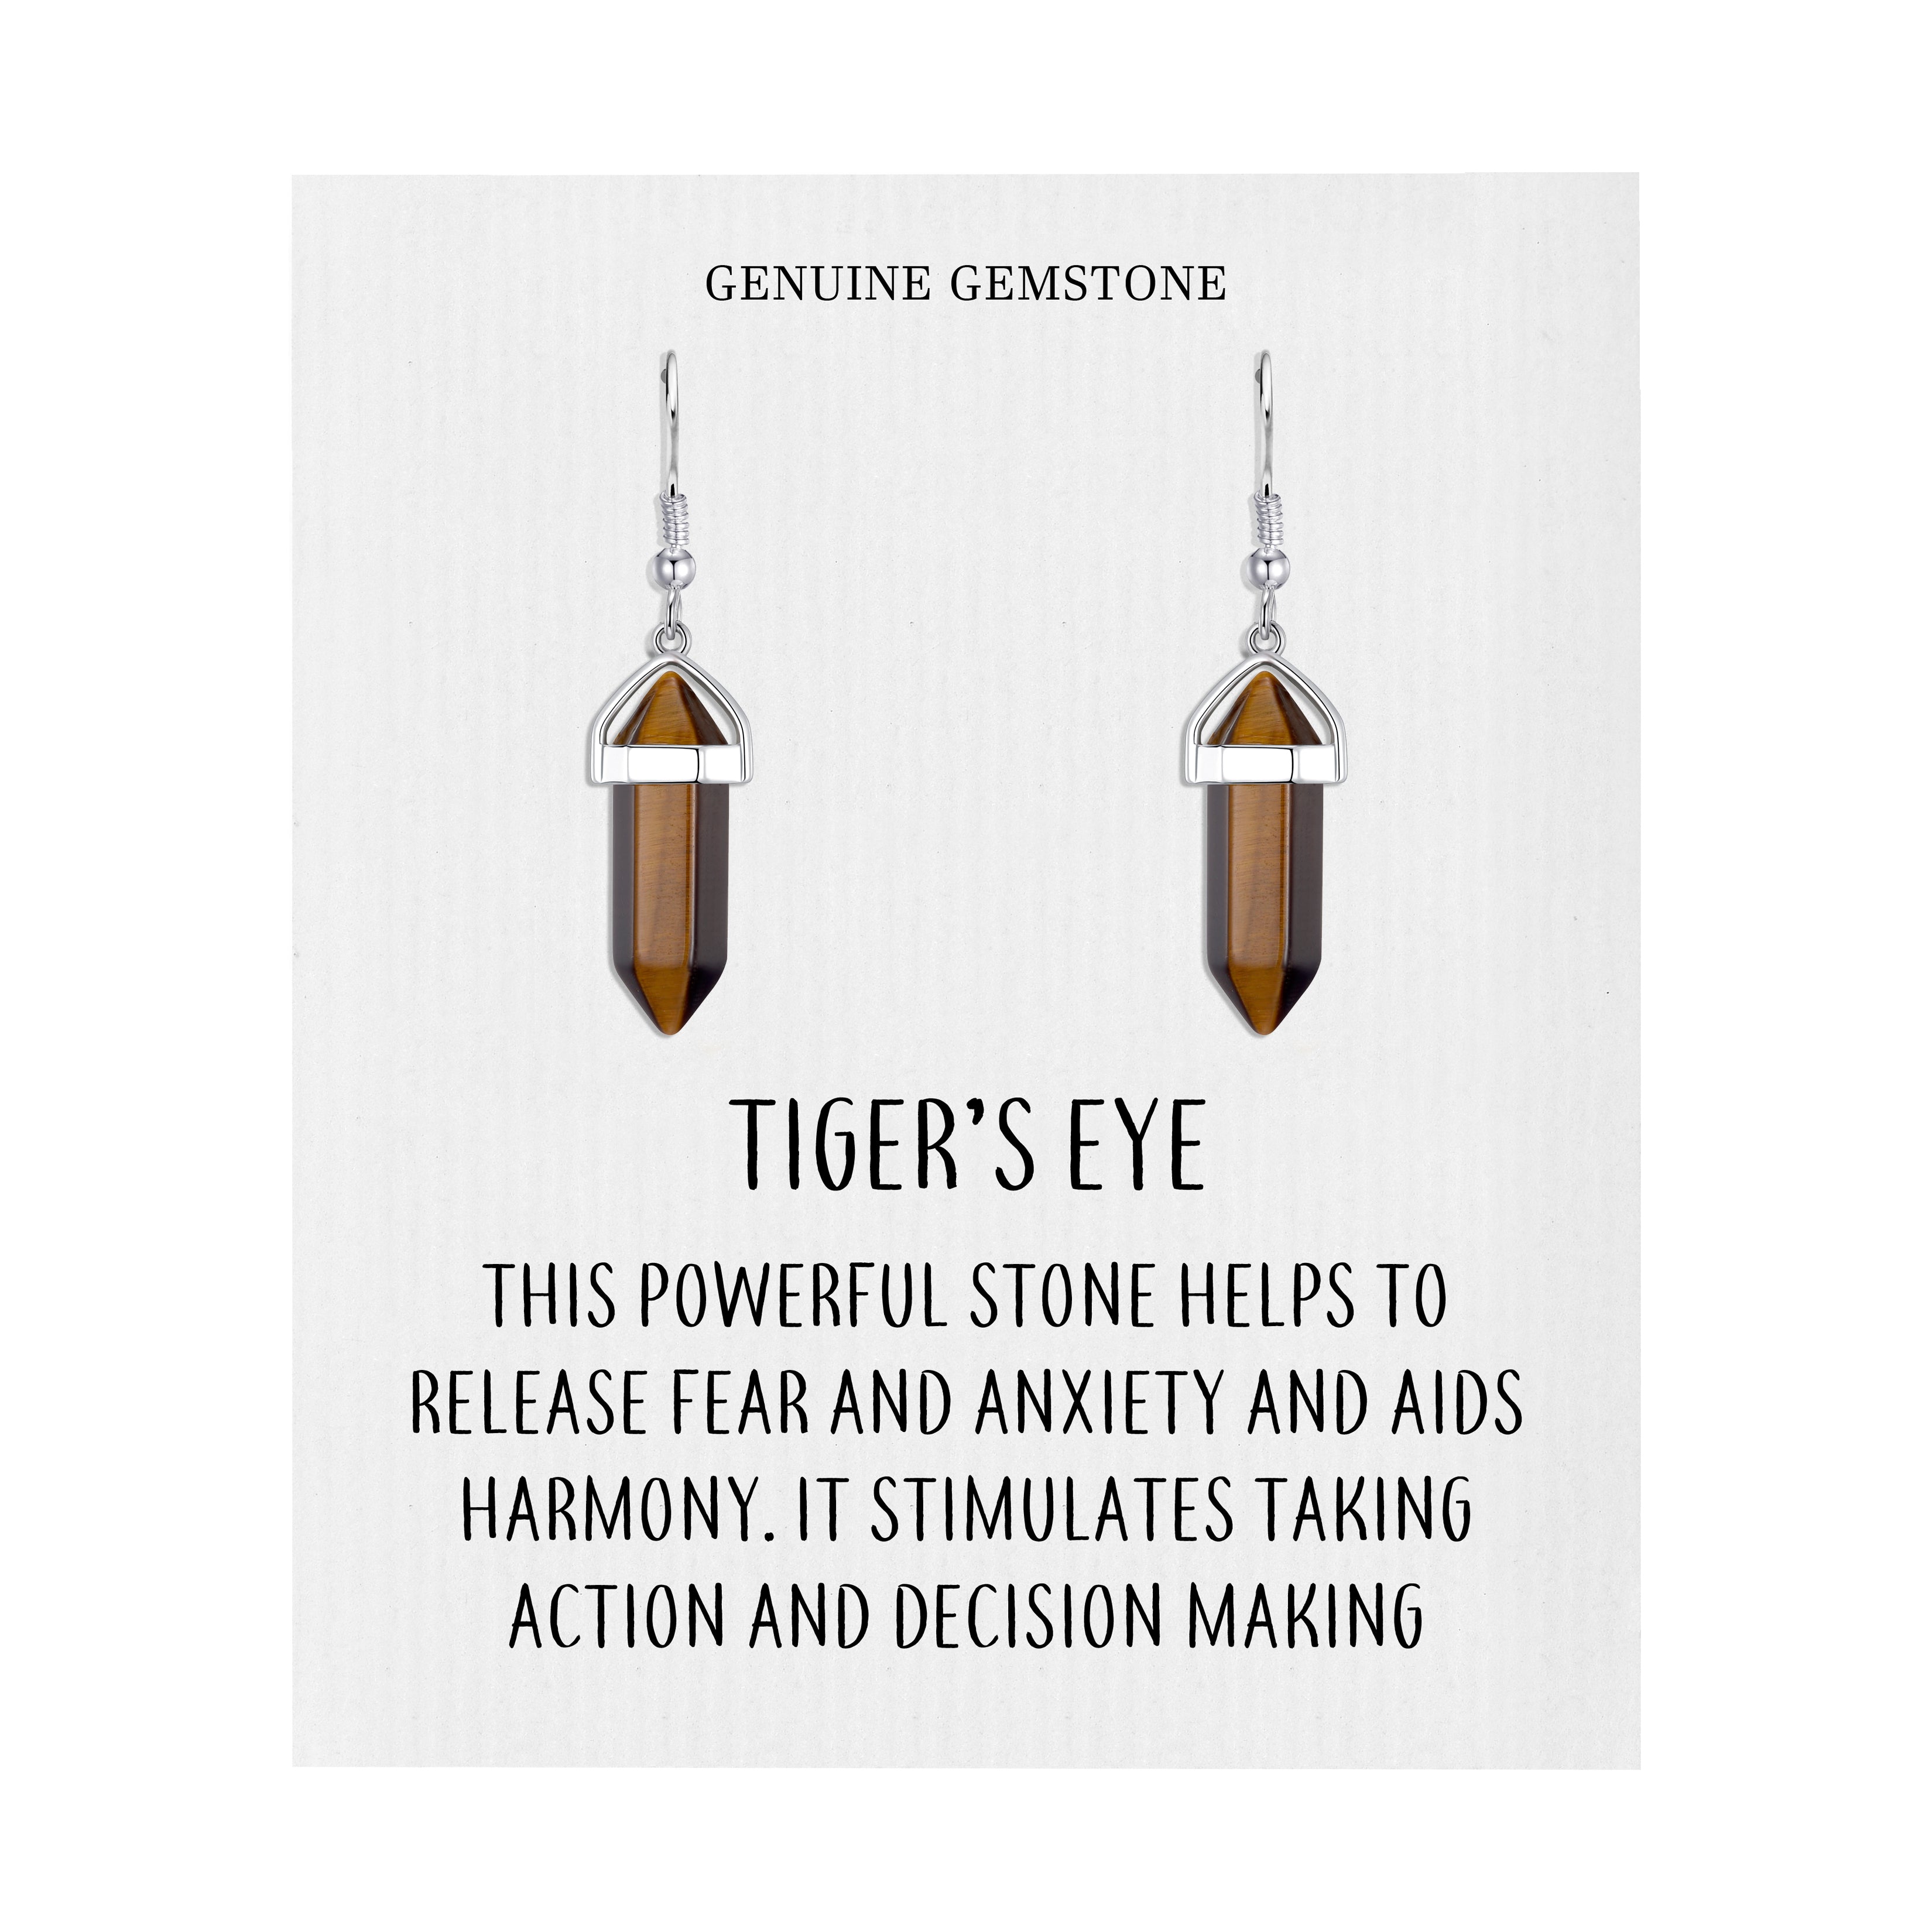 Tigers Eye Gemstone Drop Earrings with Quote Card